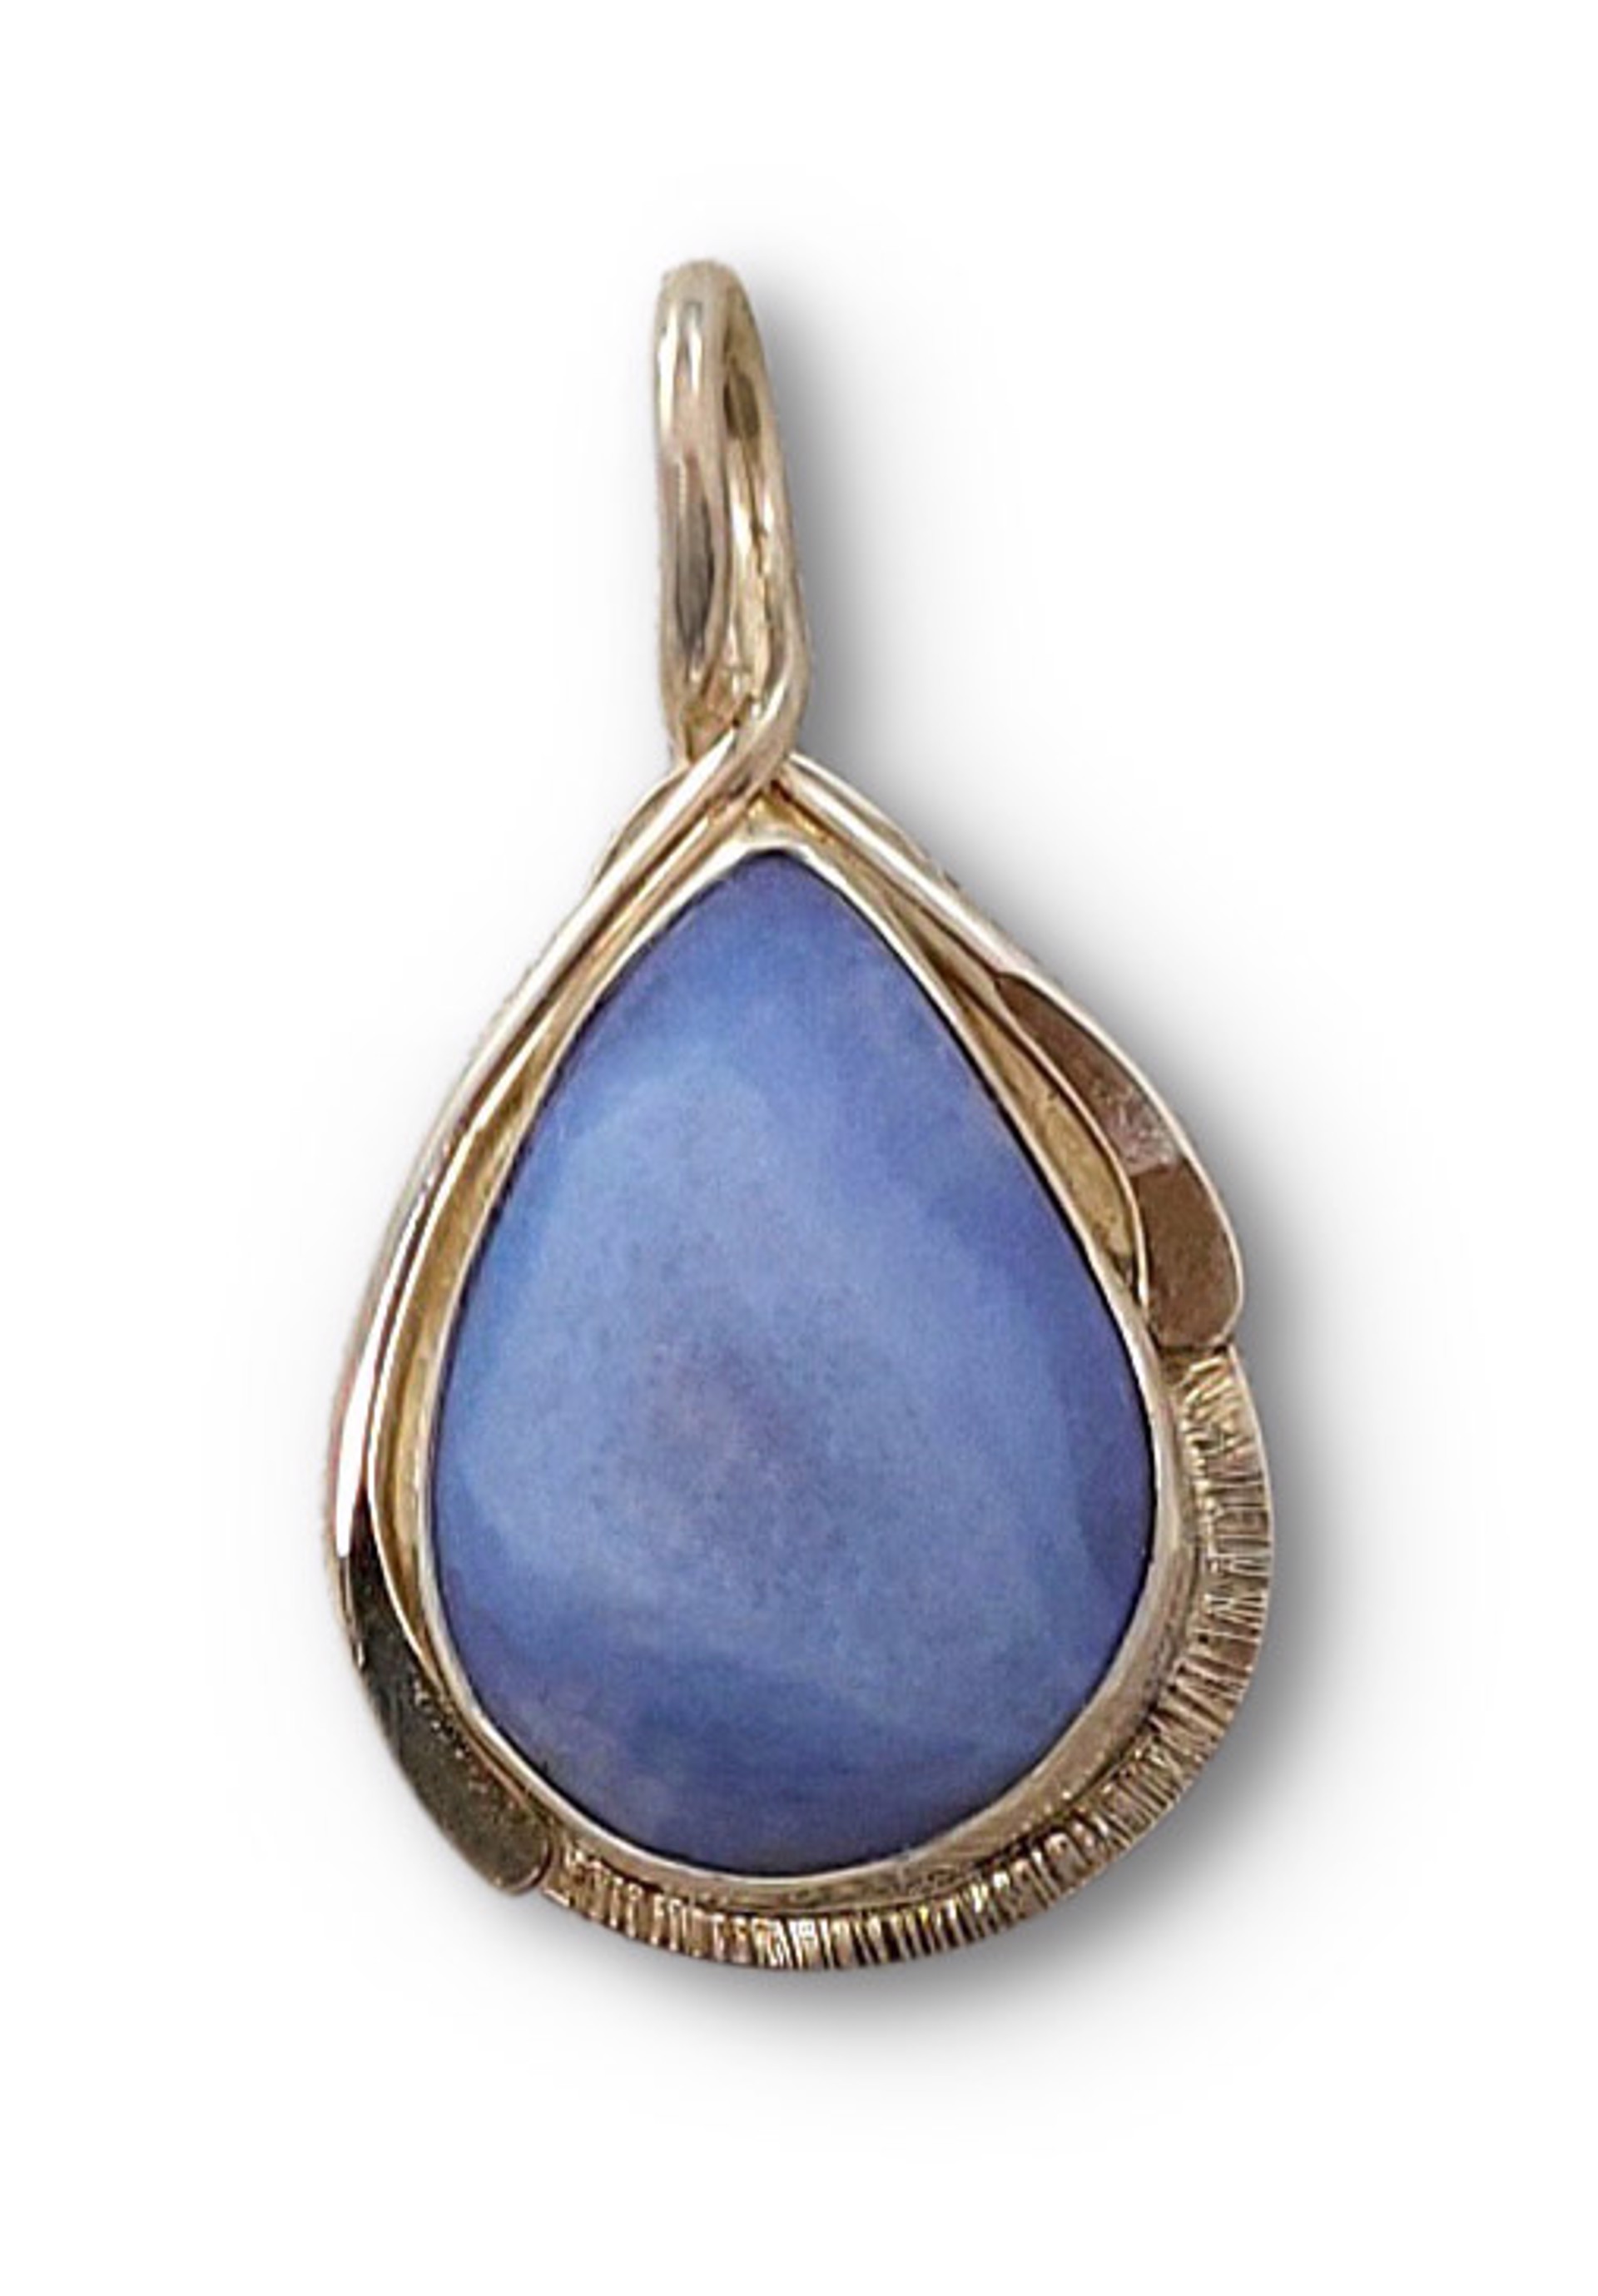 Sterling Silver Tear Drop Pendant with 30mm x 20mm Mexican Blue Lace by Leslie Eggers